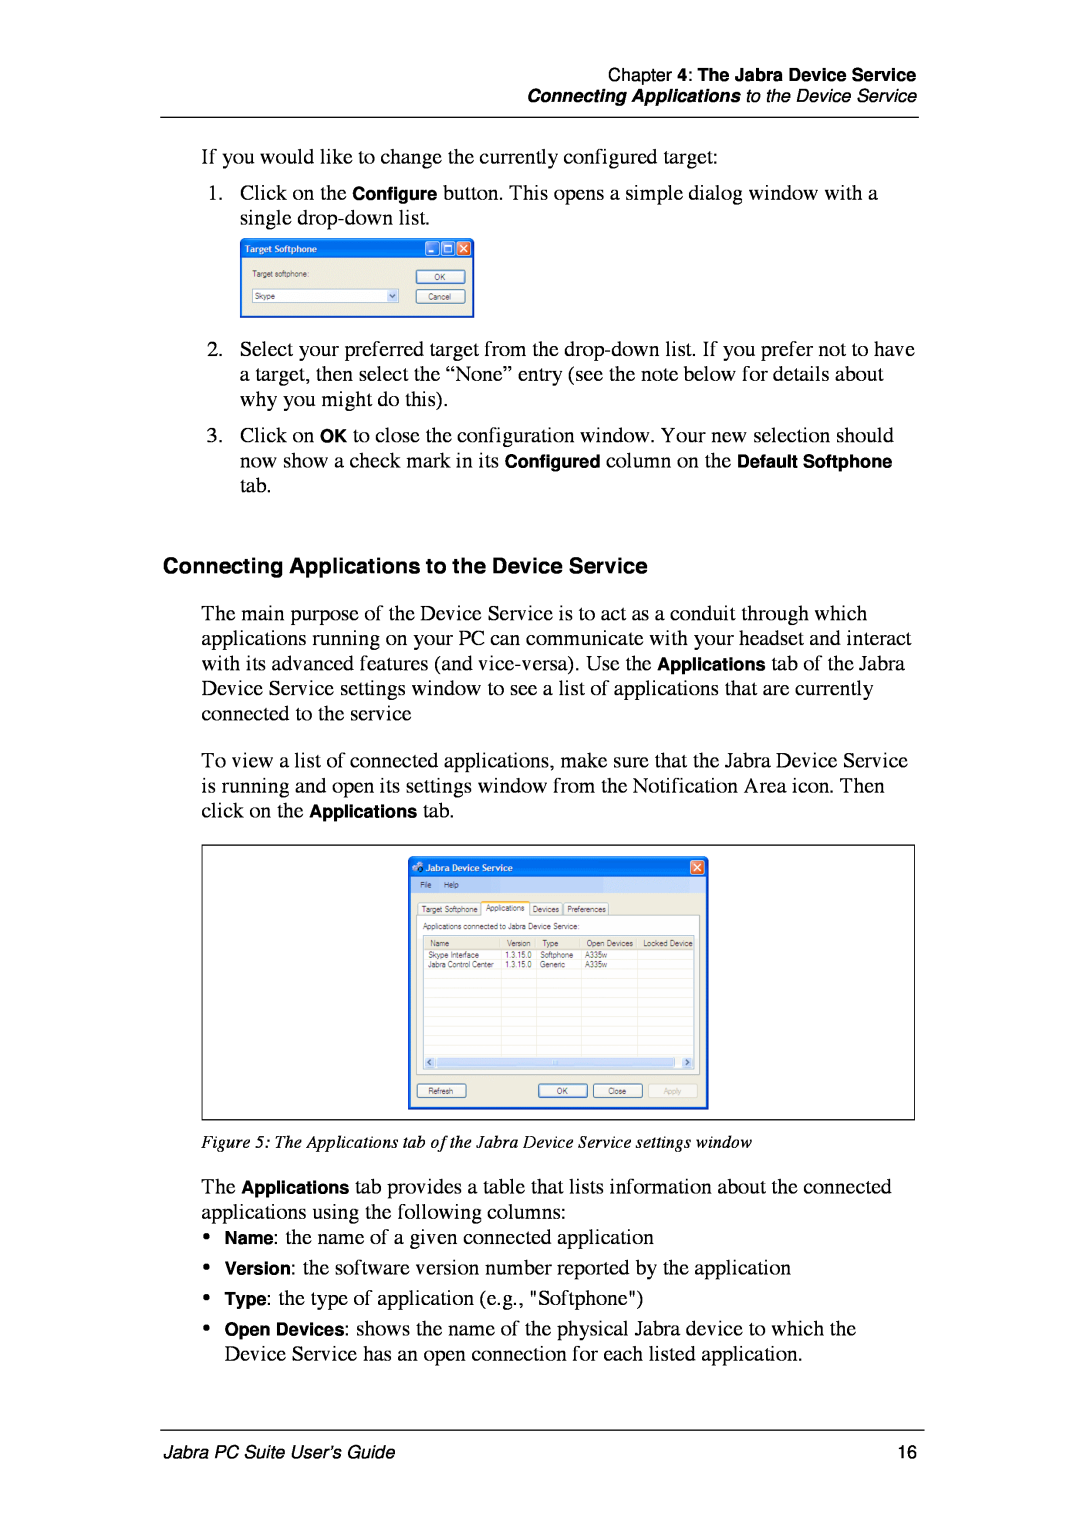 Jabra PC Suite manual Connecting Applications to the Device Service 